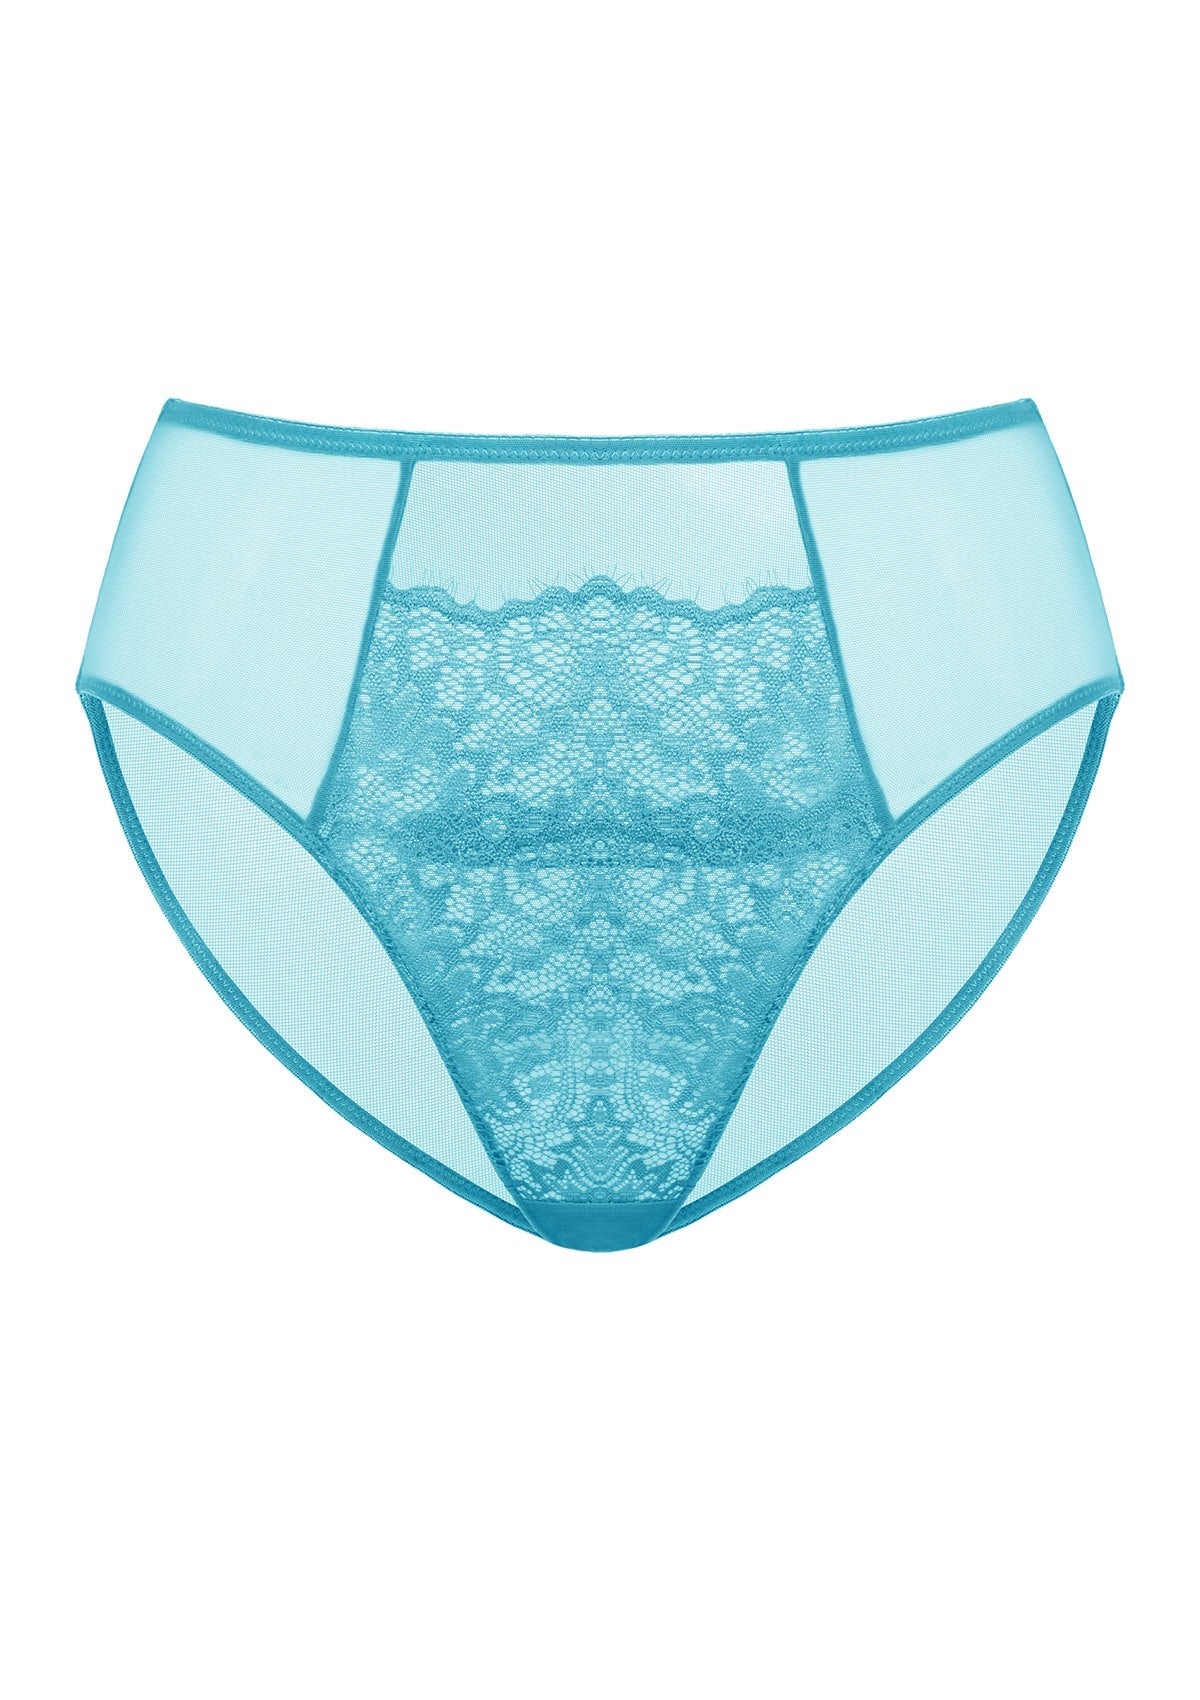 HSIA Spring Romance High-Rise Floral Lacy Panty-Comfort In Style - XXL / Horizon Blue